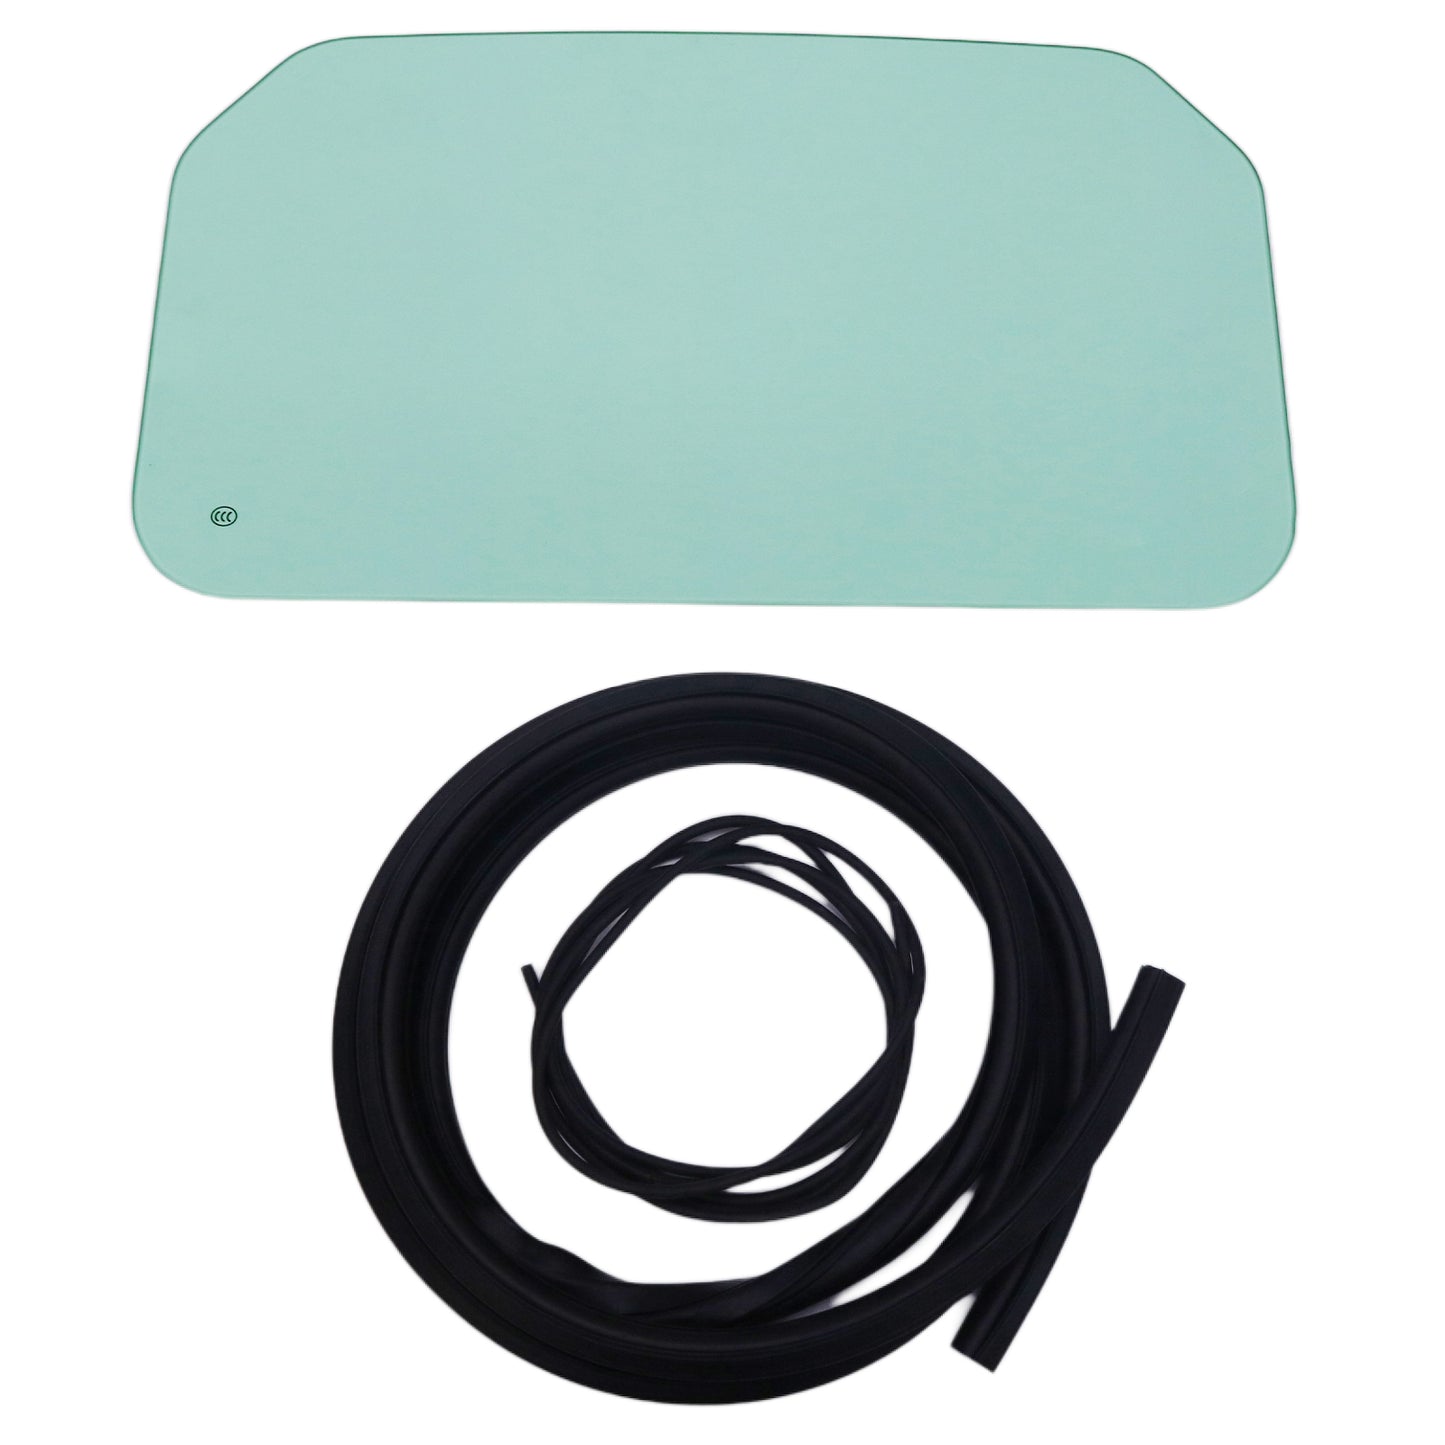 New Back Window Glass Kit Compatible with Bobcat S100 S130 S150 S160 S175 S185 S205 T110 T140 T180 T190 T200 T200 T250 T300 T320